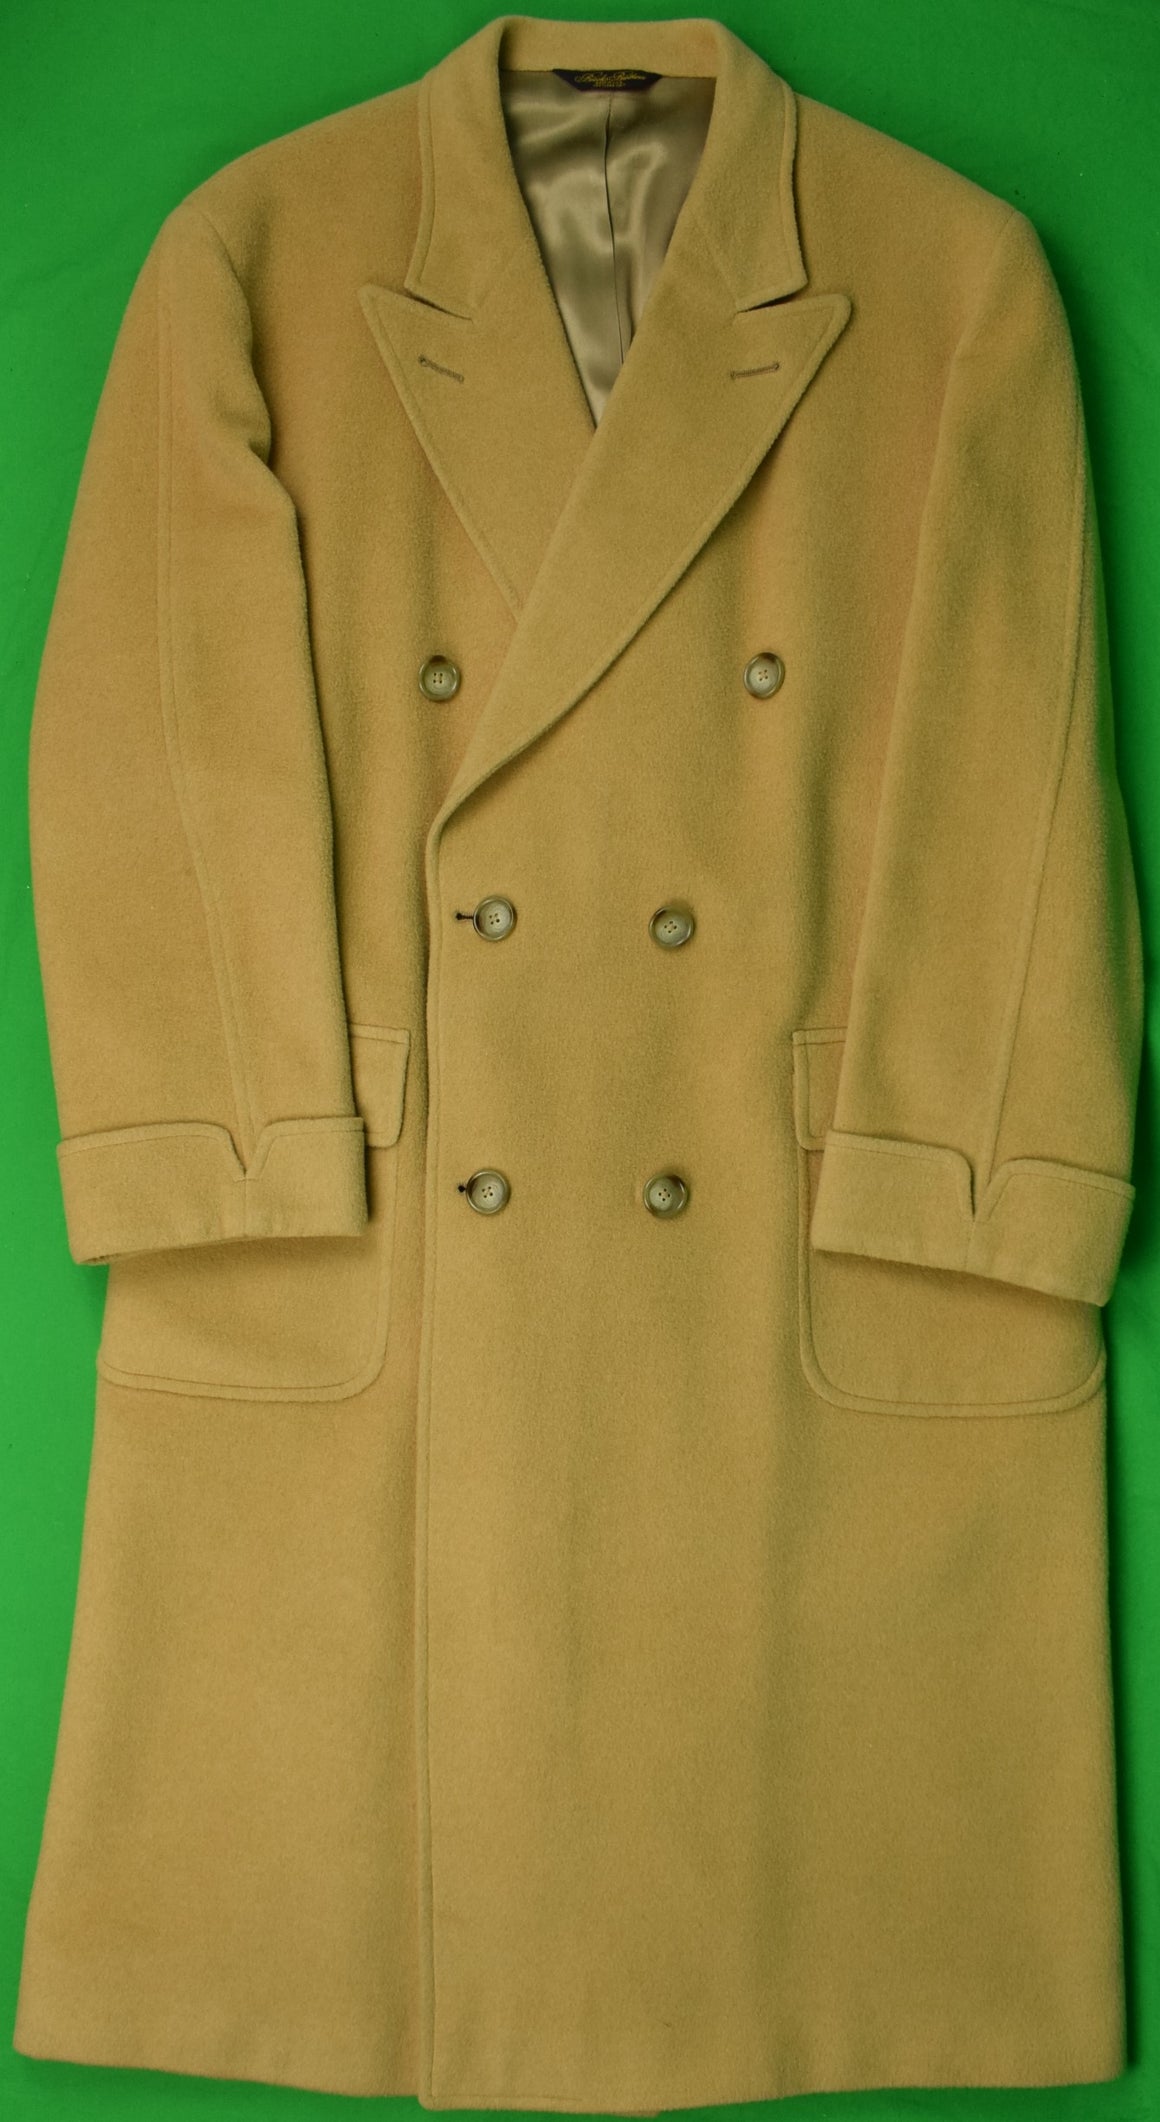 "Brooks Brothers Camel Hair Polo Coat" Sz: 46L (SOLD)